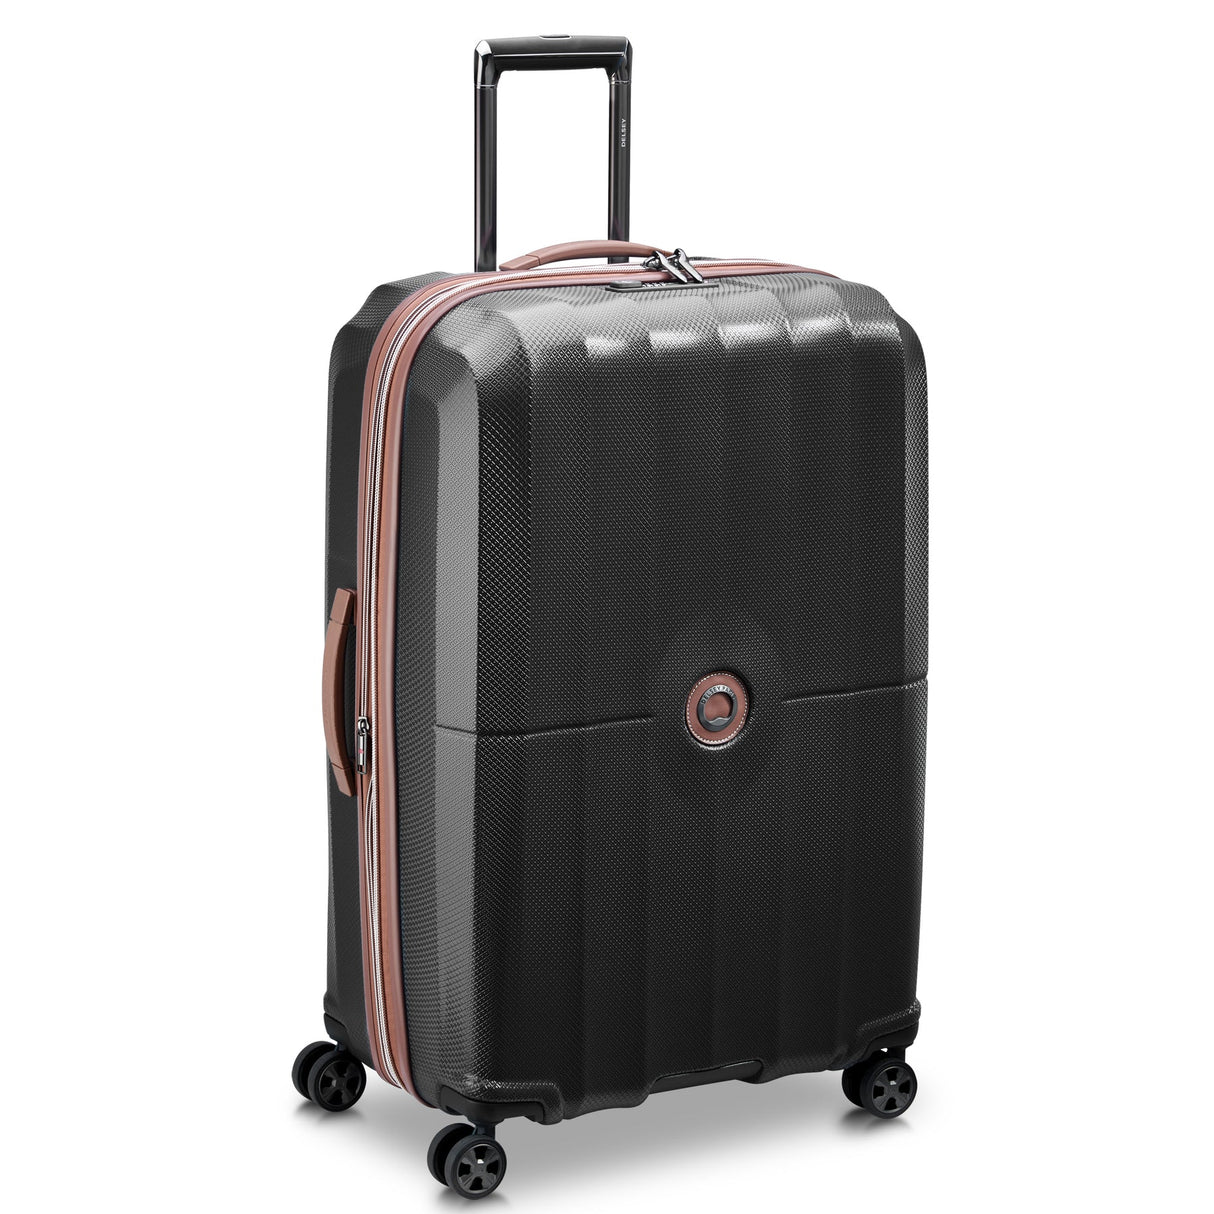 Delsey St Tropez Large Checked Expandable Spinner , , delsey-st-tropez-40208783000-02_1800x1800_58d3cace-5d3e-4f81-b1a8-4370be82e7a8